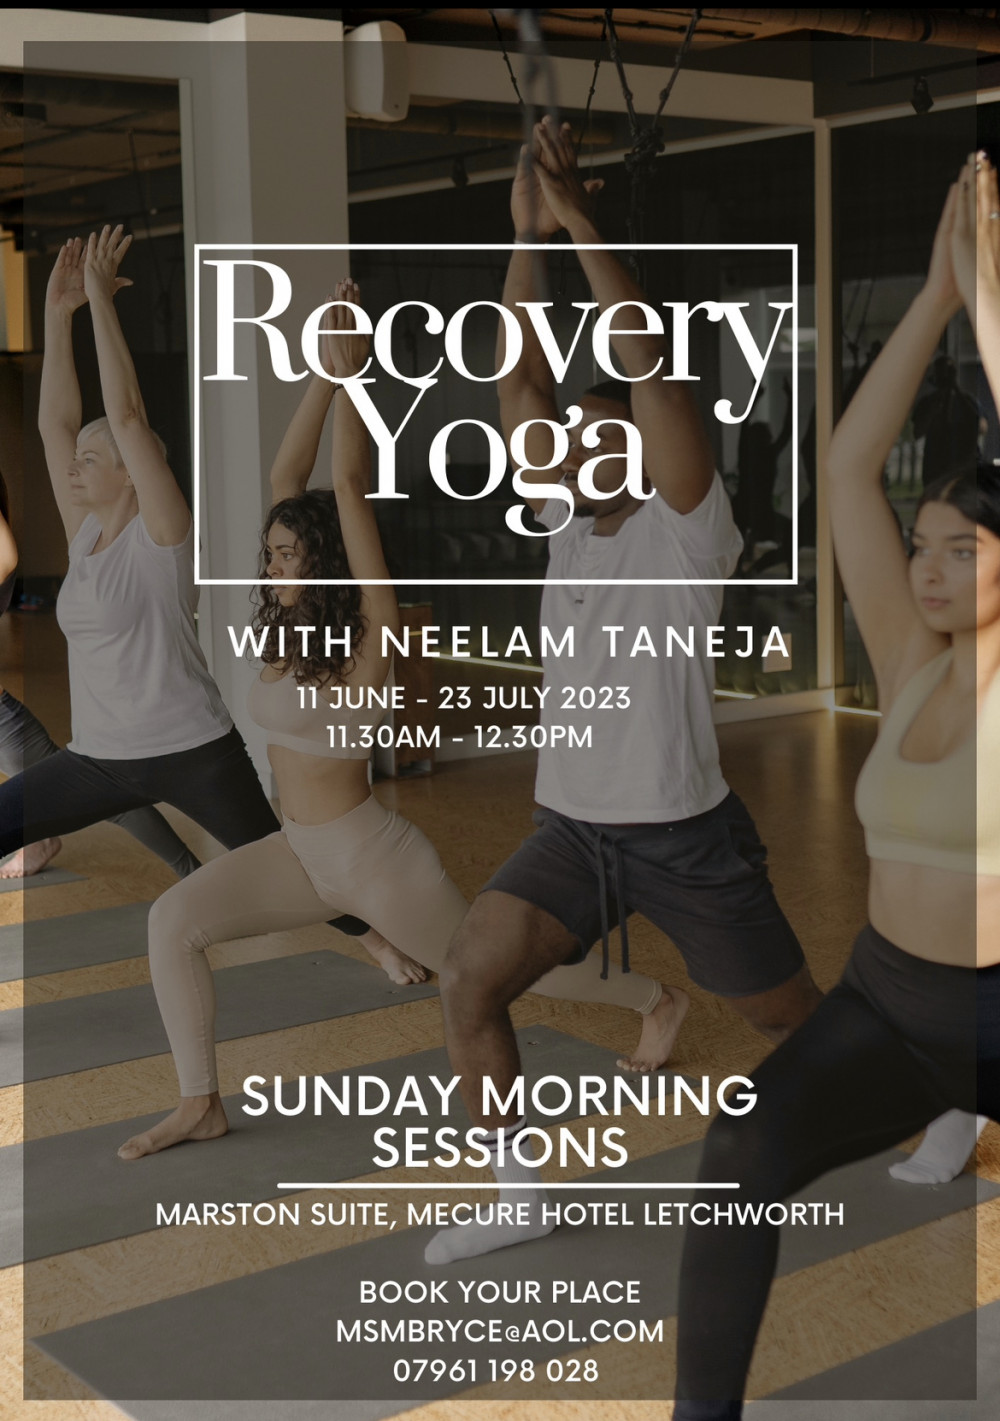 Family Yoga and Recovery Yoga with Neelam Taneja, Letchworth